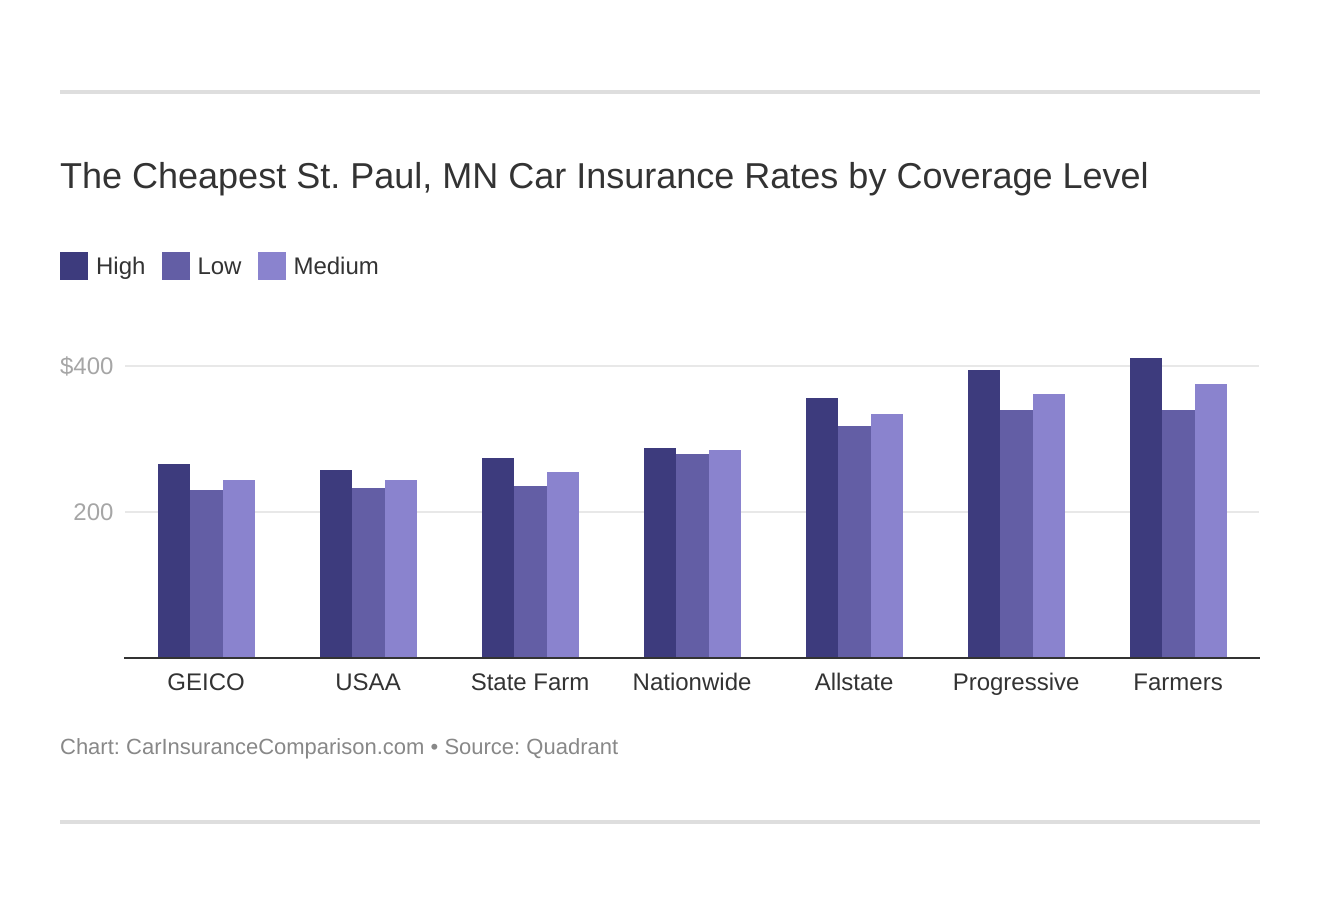 The Cheapest St. Paul, MN Car Insurance Rates by Coverage Level